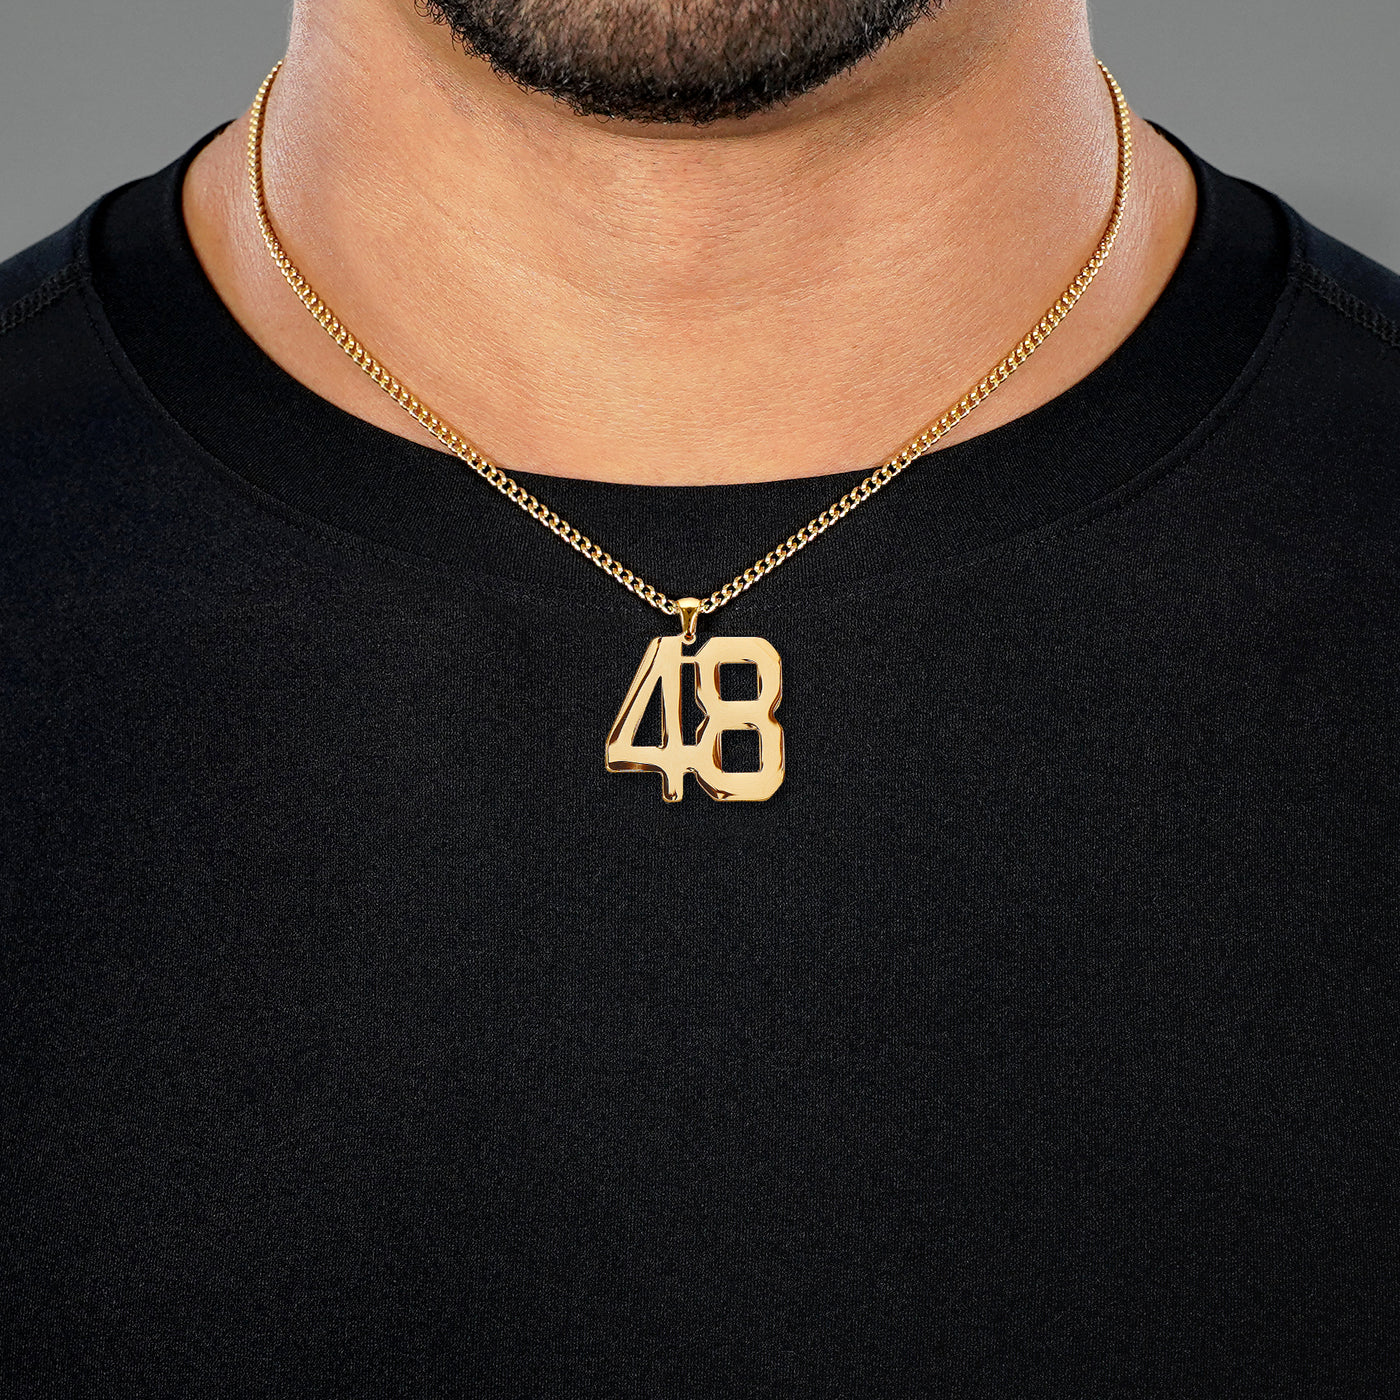 48 Number Pendant with Chain Necklace - Gold Plated Stainless Steel